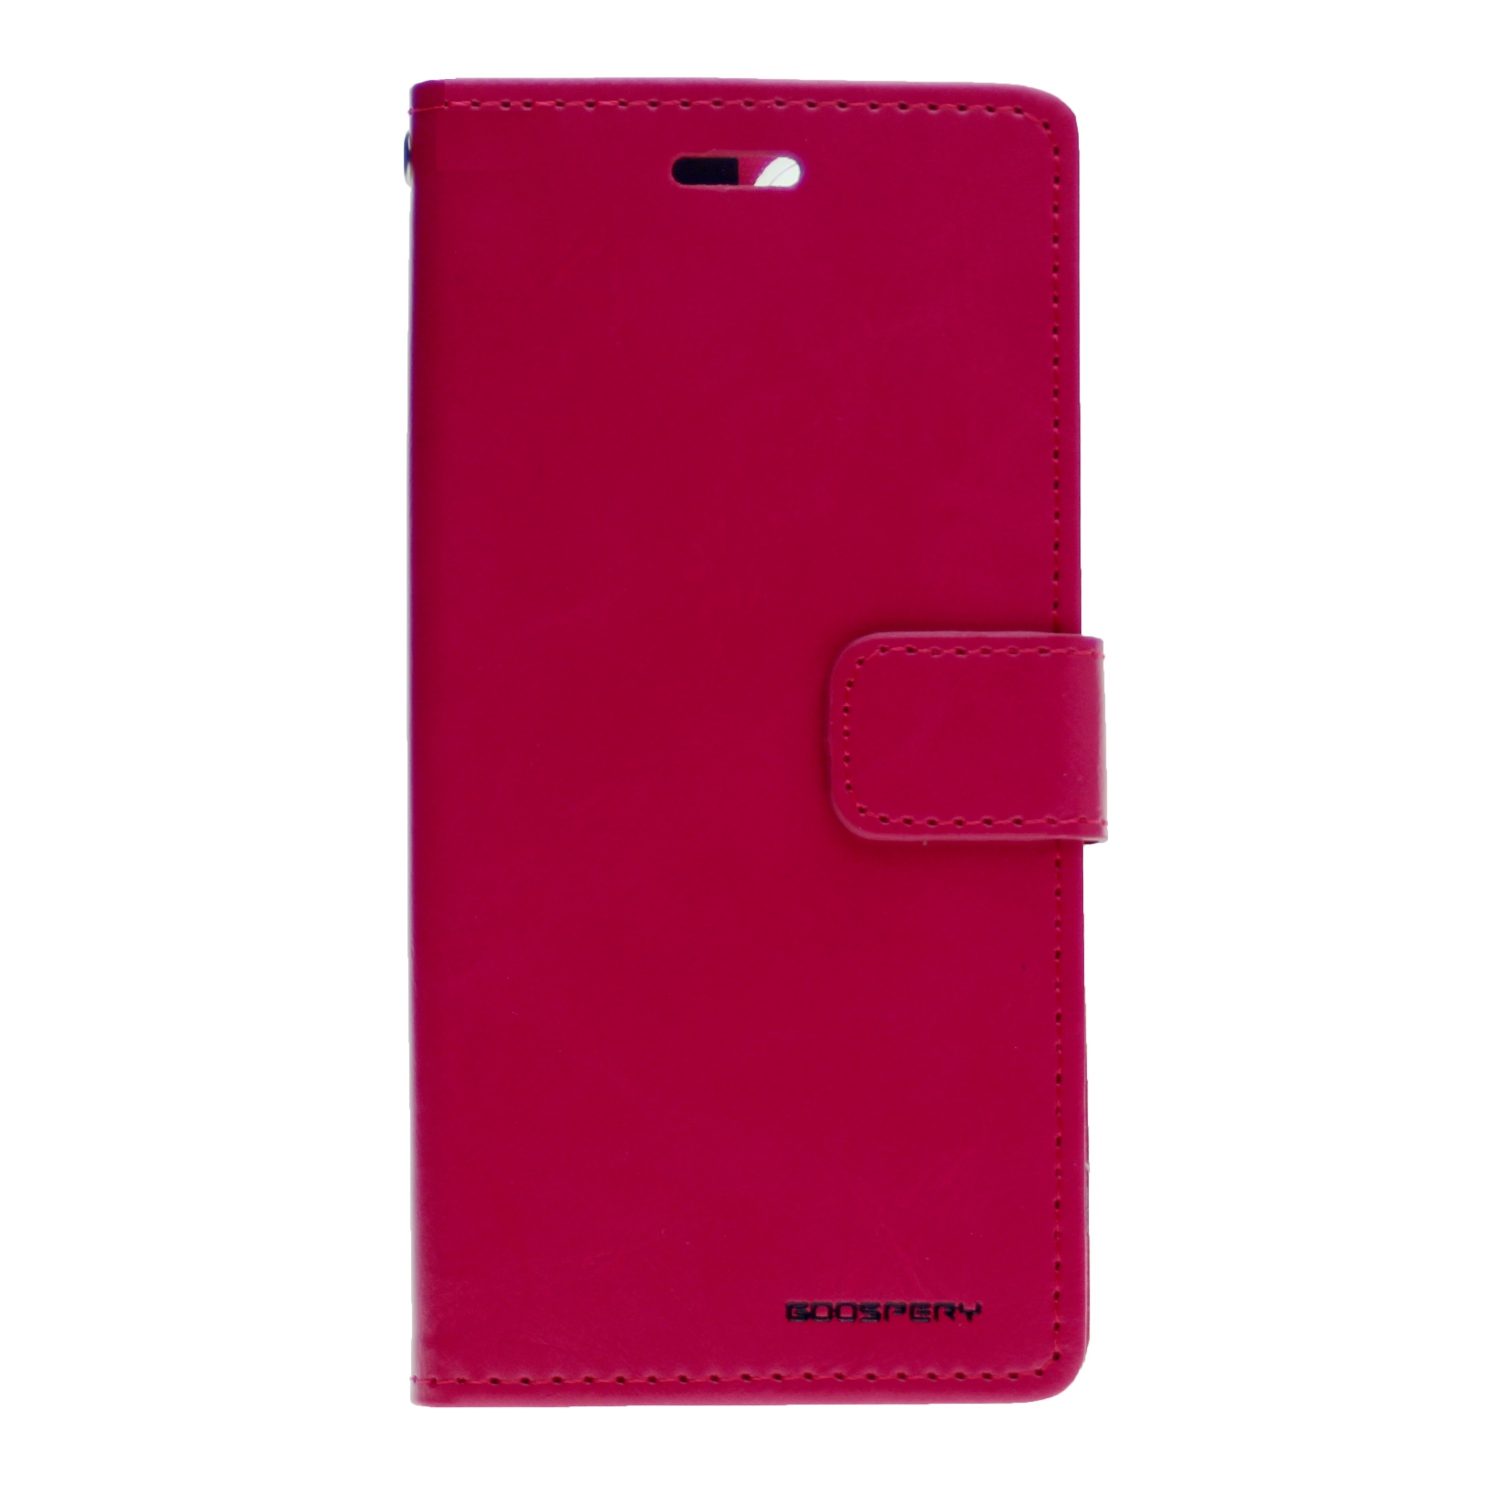 TopSave Goospery Bluemoon Diary Case For Iphone 12 Mini, Hot Pink